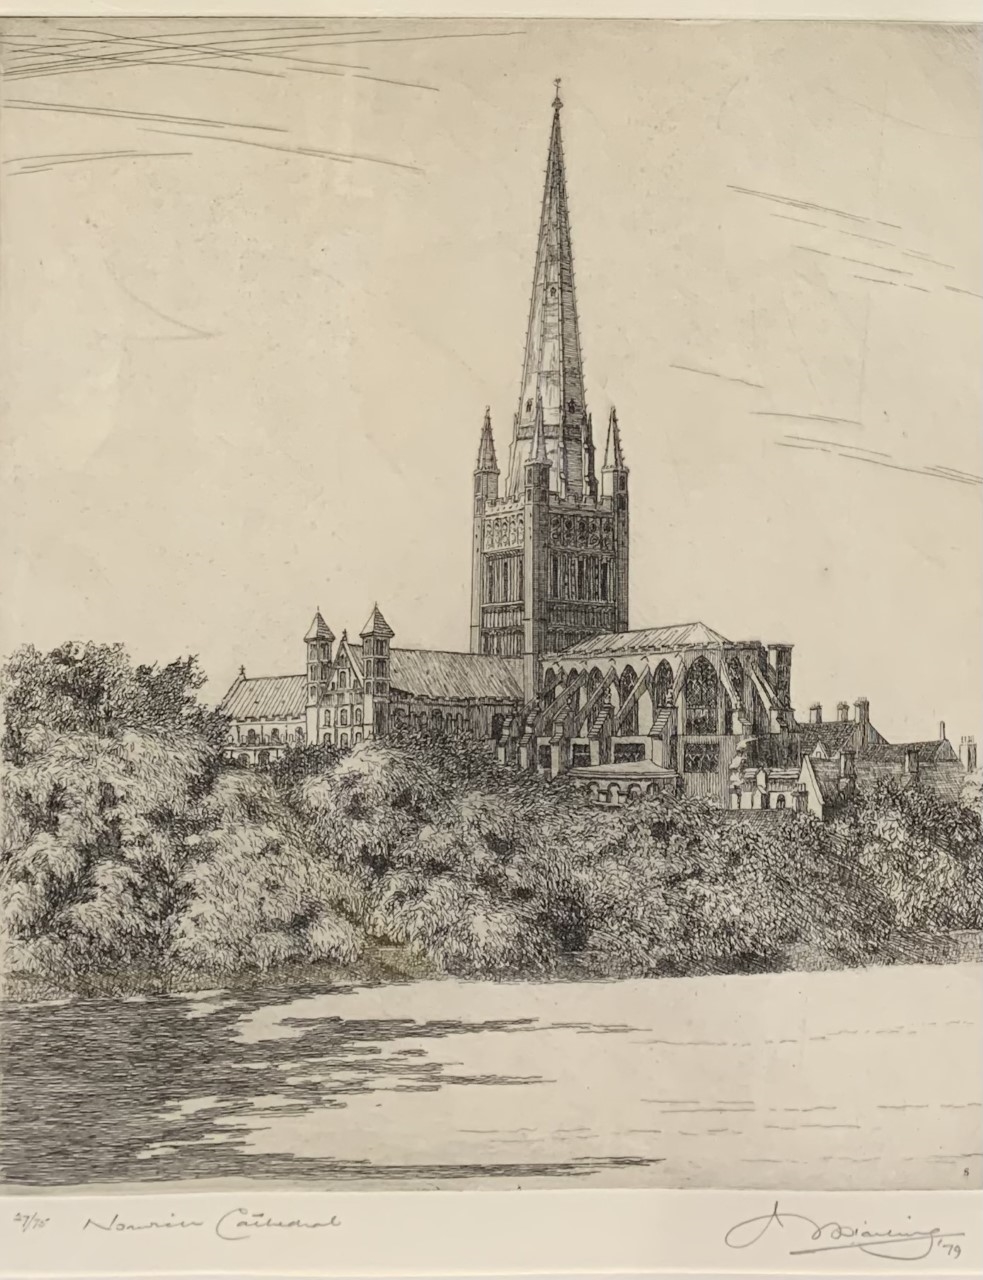 "Norwich Cathedral" by Henry James Starling